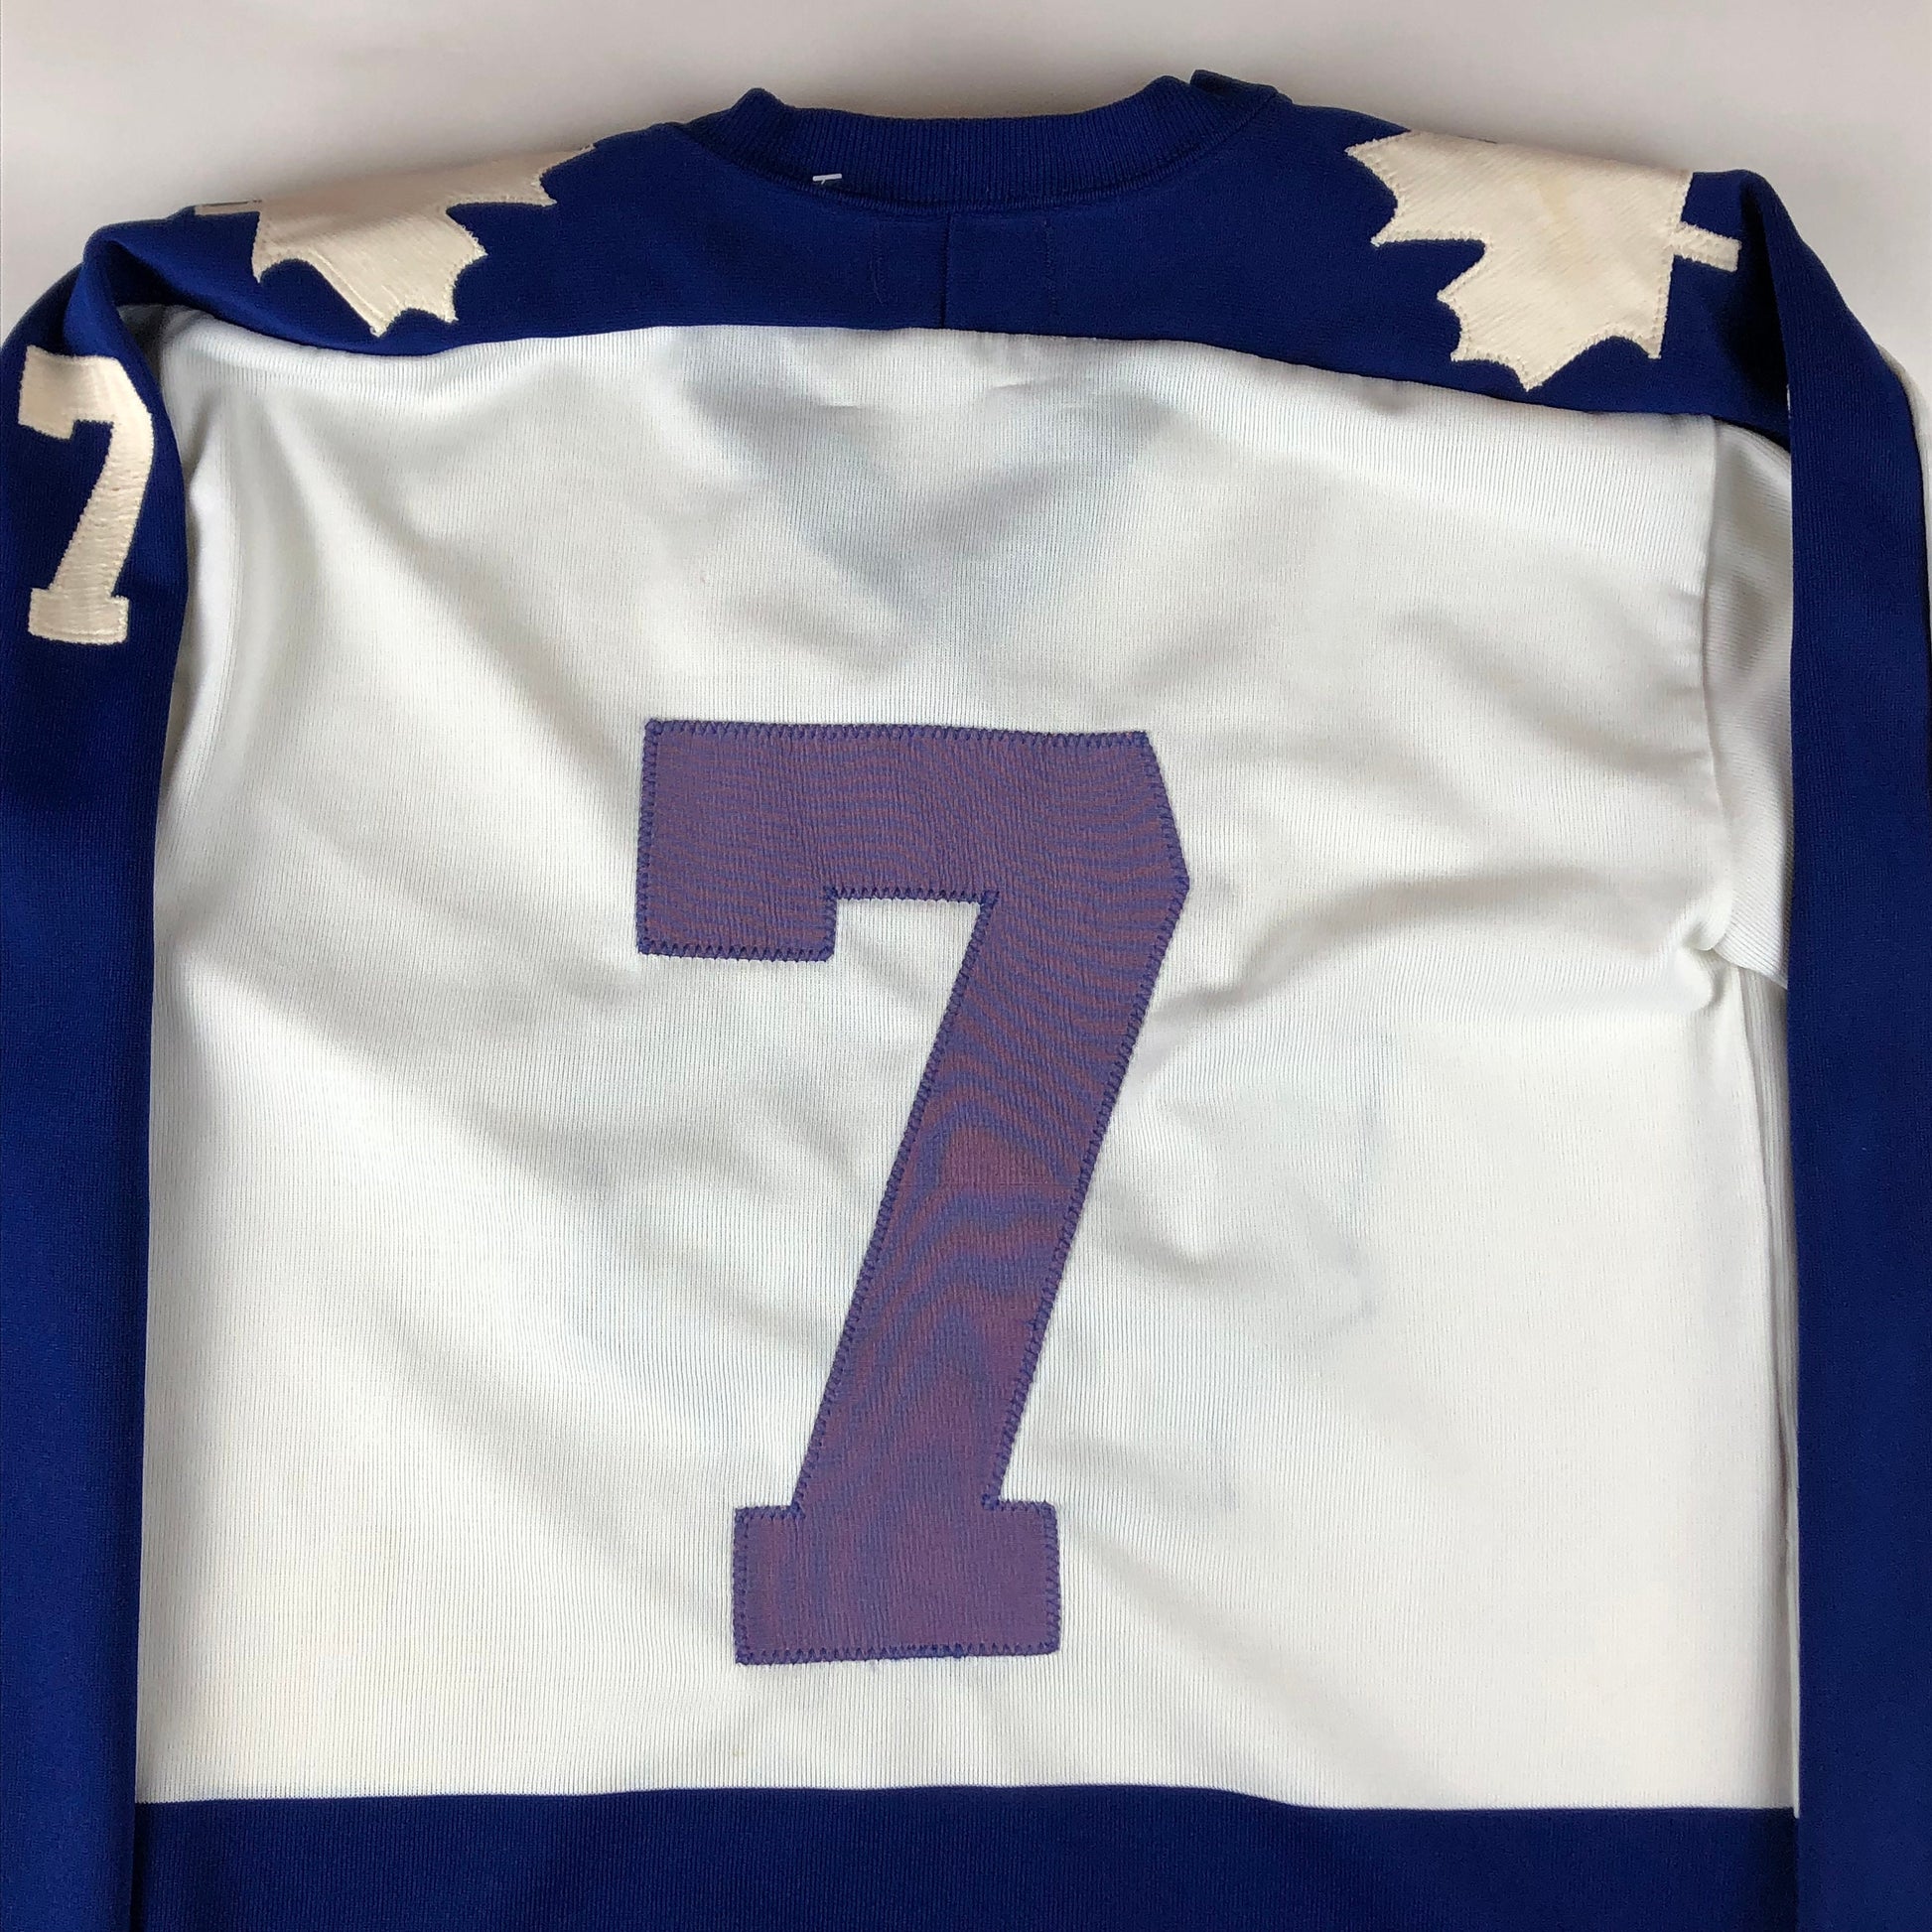 1980s Toronto Maple Leafs Jersey #7 Size XS/S – People's Champ Vintage